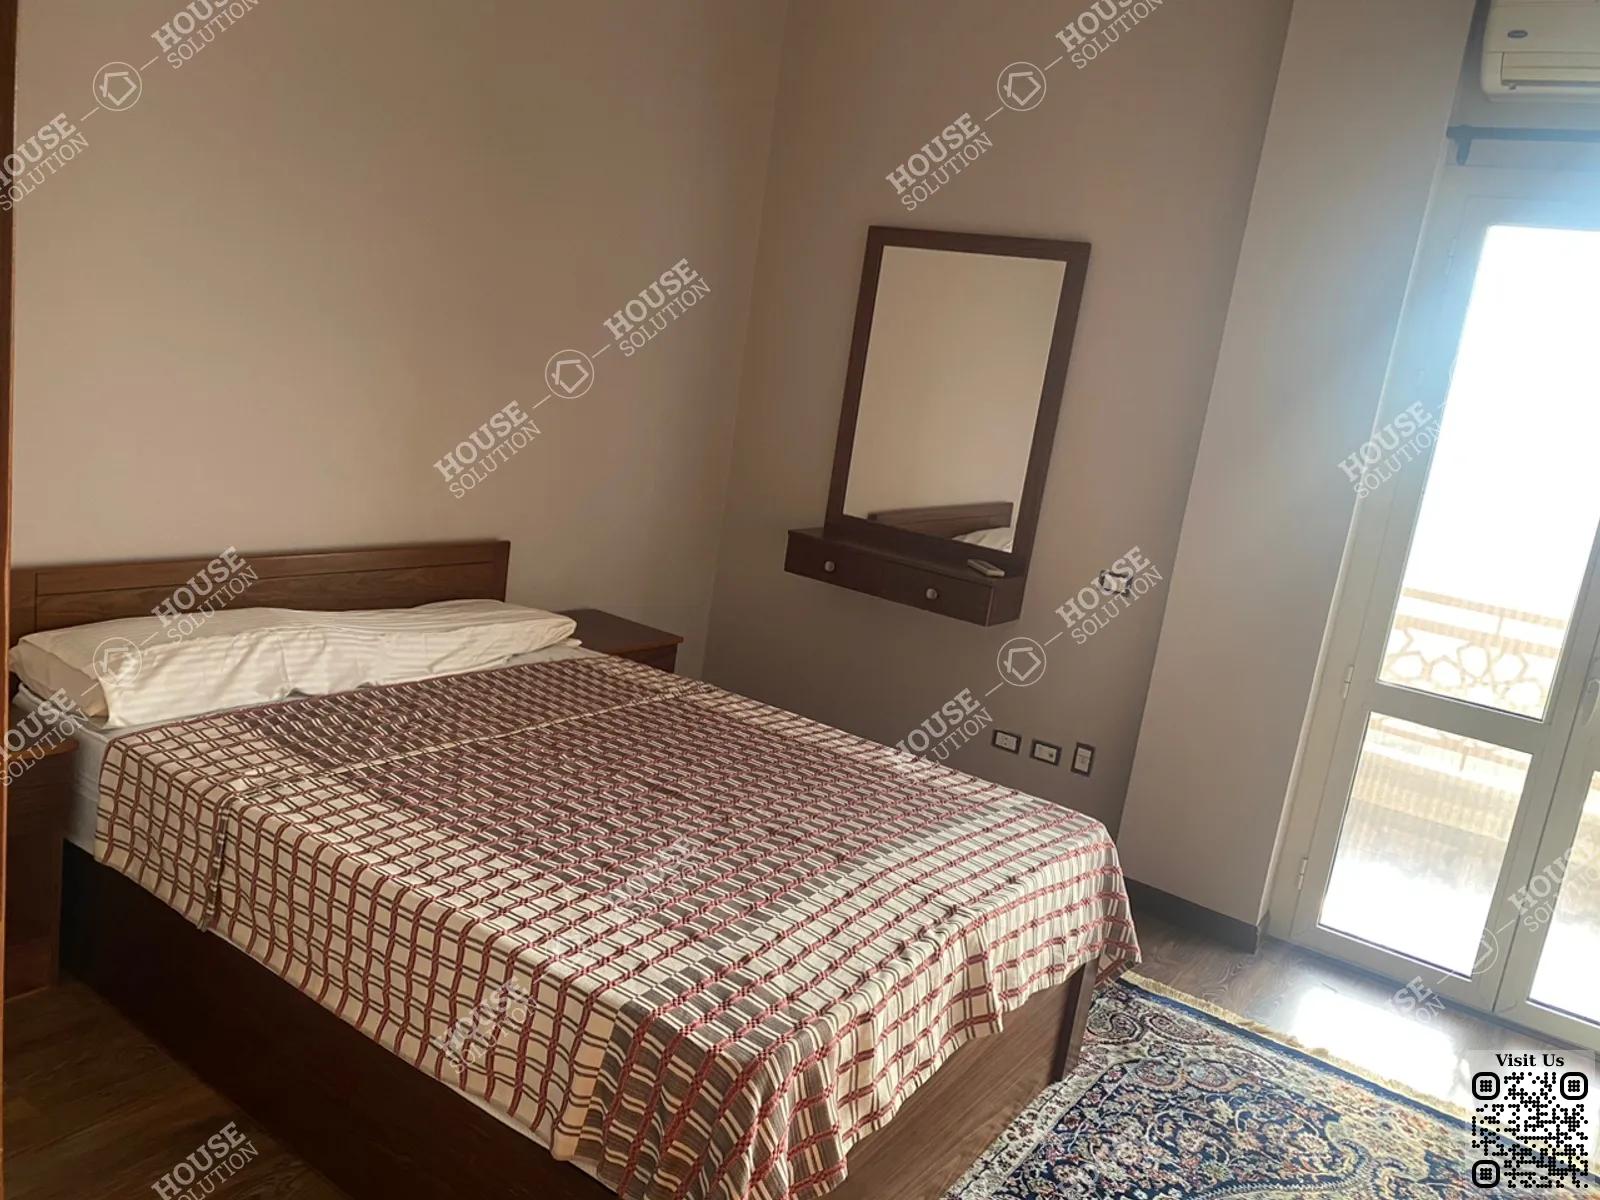 FIRST BEDROOM  @ Apartments For Rent In Maadi Maadi Degla Area: 225 m² consists of 3 Bedrooms 2 Bathrooms Semi furnished 5 stars #5623-2